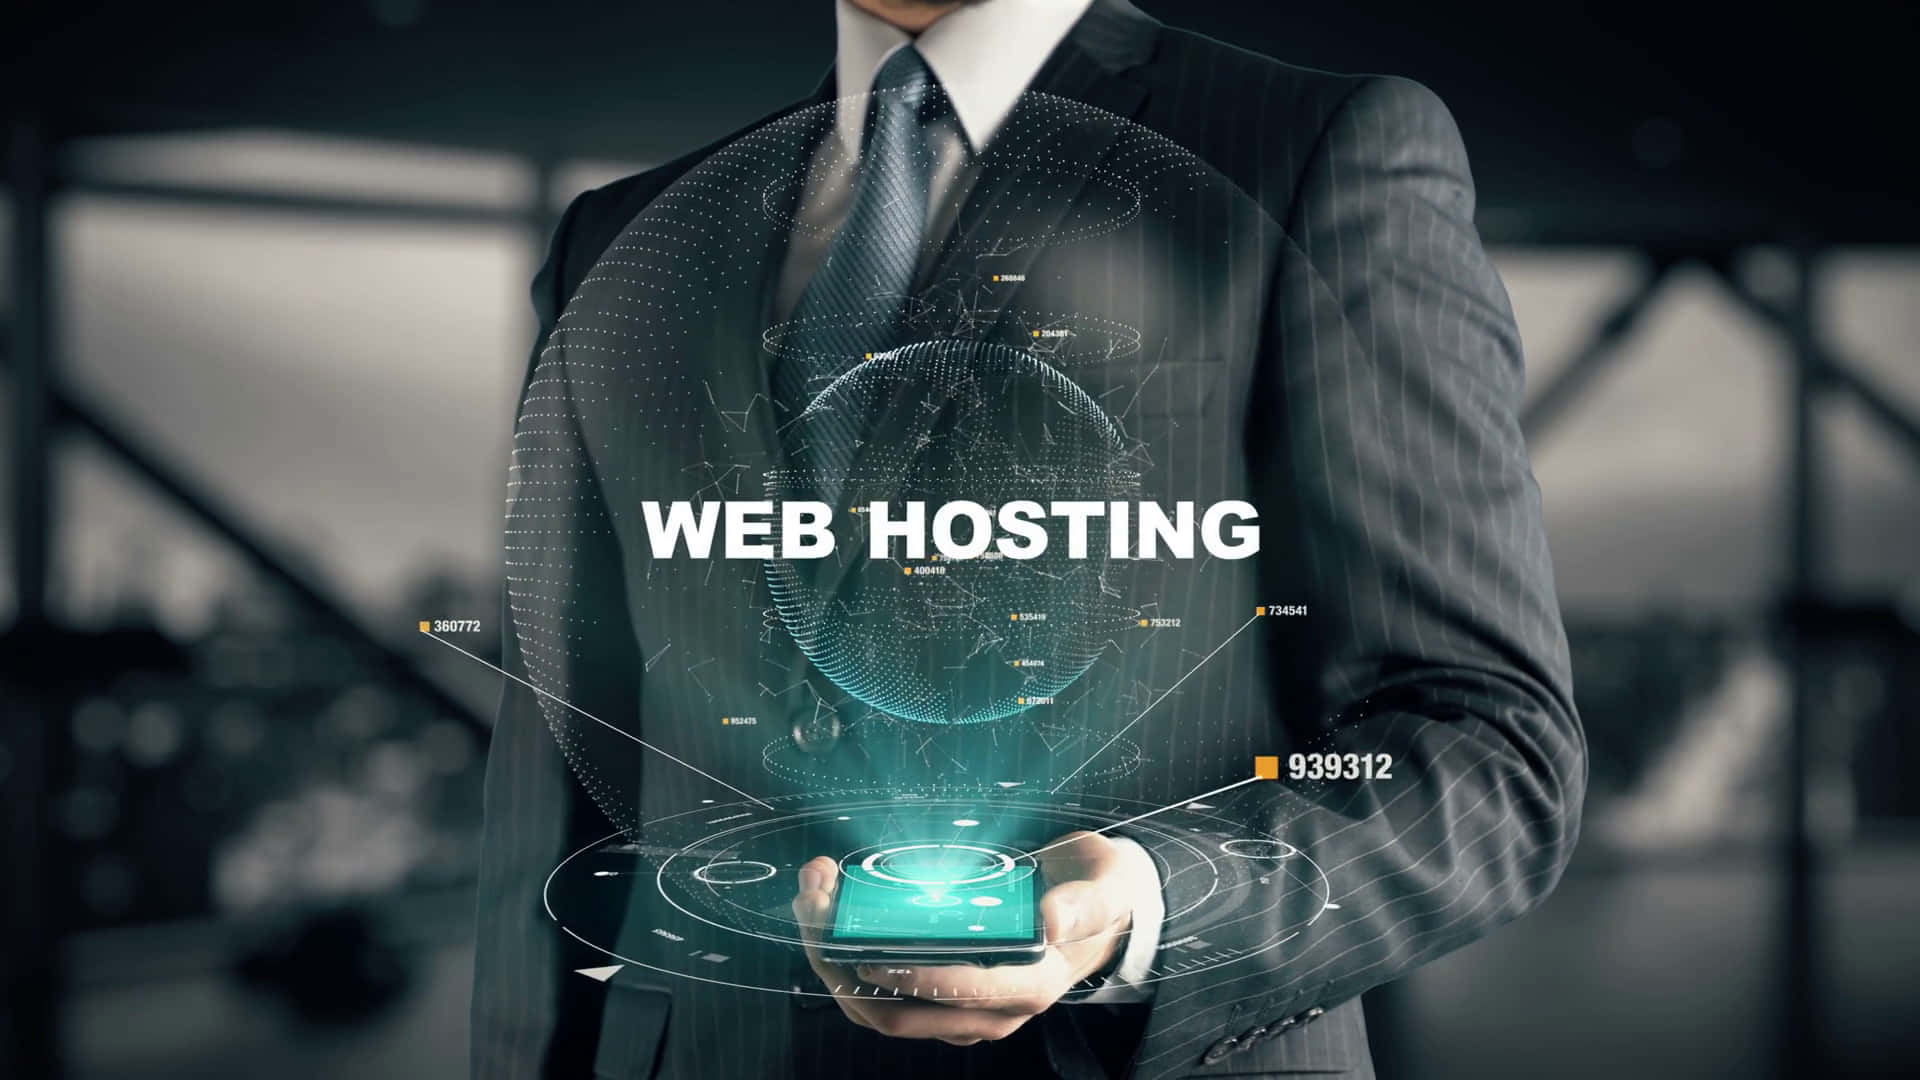 Augmented Reality Web Hosting Wallpaper